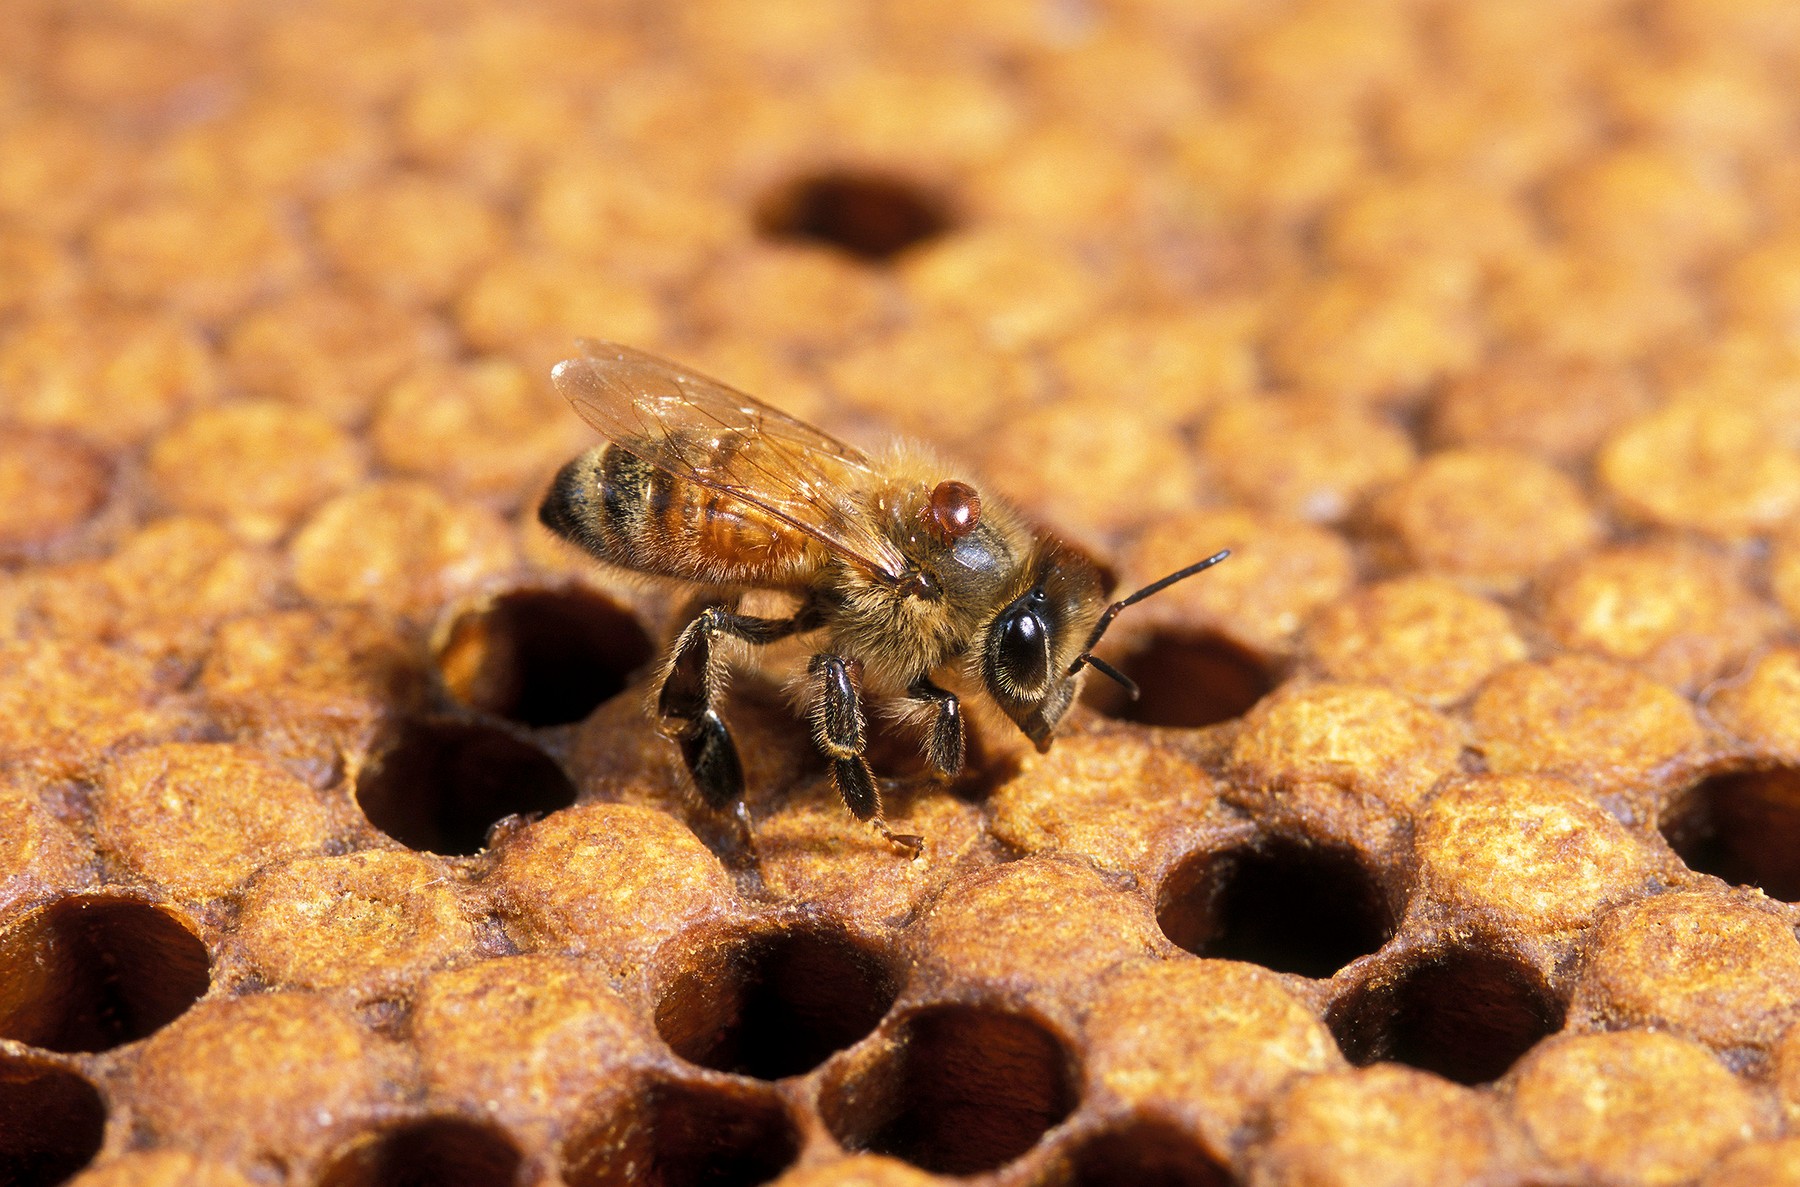 Honey bee with Varroa mites. This adult worker honey bee (Apis mellifera) has two parasitic mites, Varroa destructor (brown) on its thorax. The mites replicate in a bee colony. The female mites lay eggs in a brood cell, and after hatching, the young mites attach to the developing bee. The mites feed on the bee's haemolymph, the blood-like fluid that bathes its cells and organs. As the bees have no defence against the mites, an infestation usually kills the entire colony., Image: 103060892, License: Rights-managed, Restrictions: , Model Release: no, Credit line: Science Photo Library / Sciencephoto / Profimedia